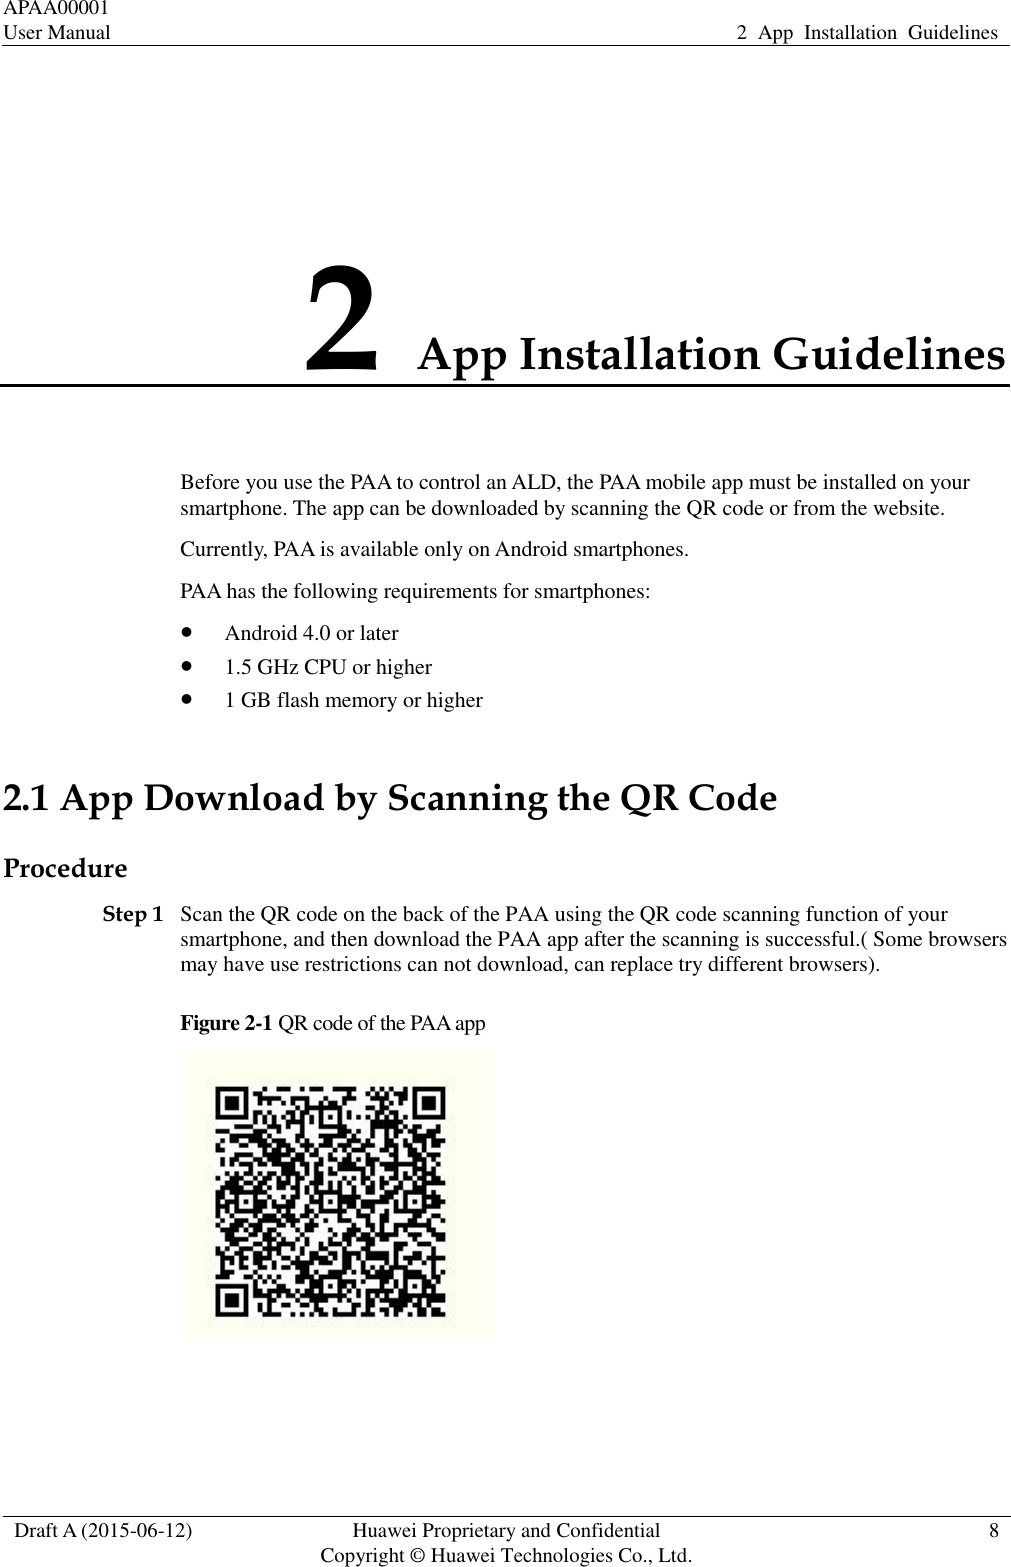 APAA00001 User Manual 2  App  Installation  Guidelines  Draft A (2015-06-12) Huawei Proprietary and Confidential           Copyright © Huawei Technologies Co., Ltd. 8  2 App Installation Guidelines Before you use the PAA to control an ALD, the PAA mobile app must be installed on your smartphone. The app can be downloaded by scanning the QR code or from the website.   Currently, PAA is available only on Android smartphones.   PAA has the following requirements for smartphones:  Android 4.0 or later  1.5 GHz CPU or higher  1 GB flash memory or higher 2.1 App Download by Scanning the QR Code Procedure Step 1 Scan the QR code on the back of the PAA using the QR code scanning function of your smartphone, and then download the PAA app after the scanning is successful.( Some browsers may have use restrictions can not download, can replace try different browsers). Figure 2-1 QR code of the PAA app   